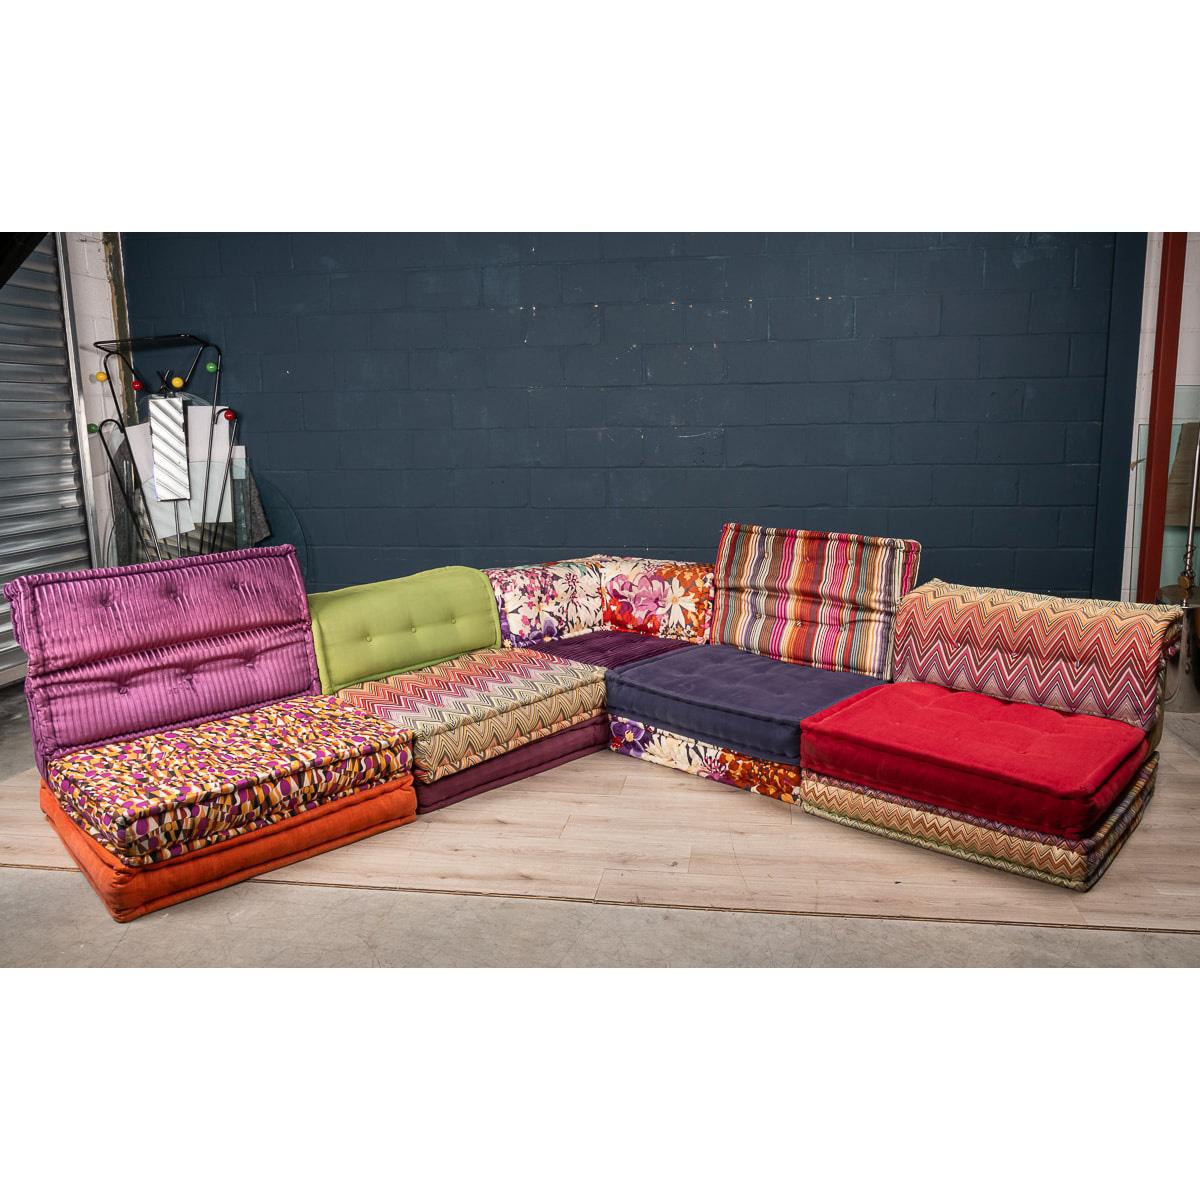 Elevate a living space with this stunning designer “Mah Jong” modular sofa suite by Roche Bobois. The set consists of ten seat cushions, one corner backrest and four (adjustable) straight backrests. Perfect for any lounge, cinema room or games room